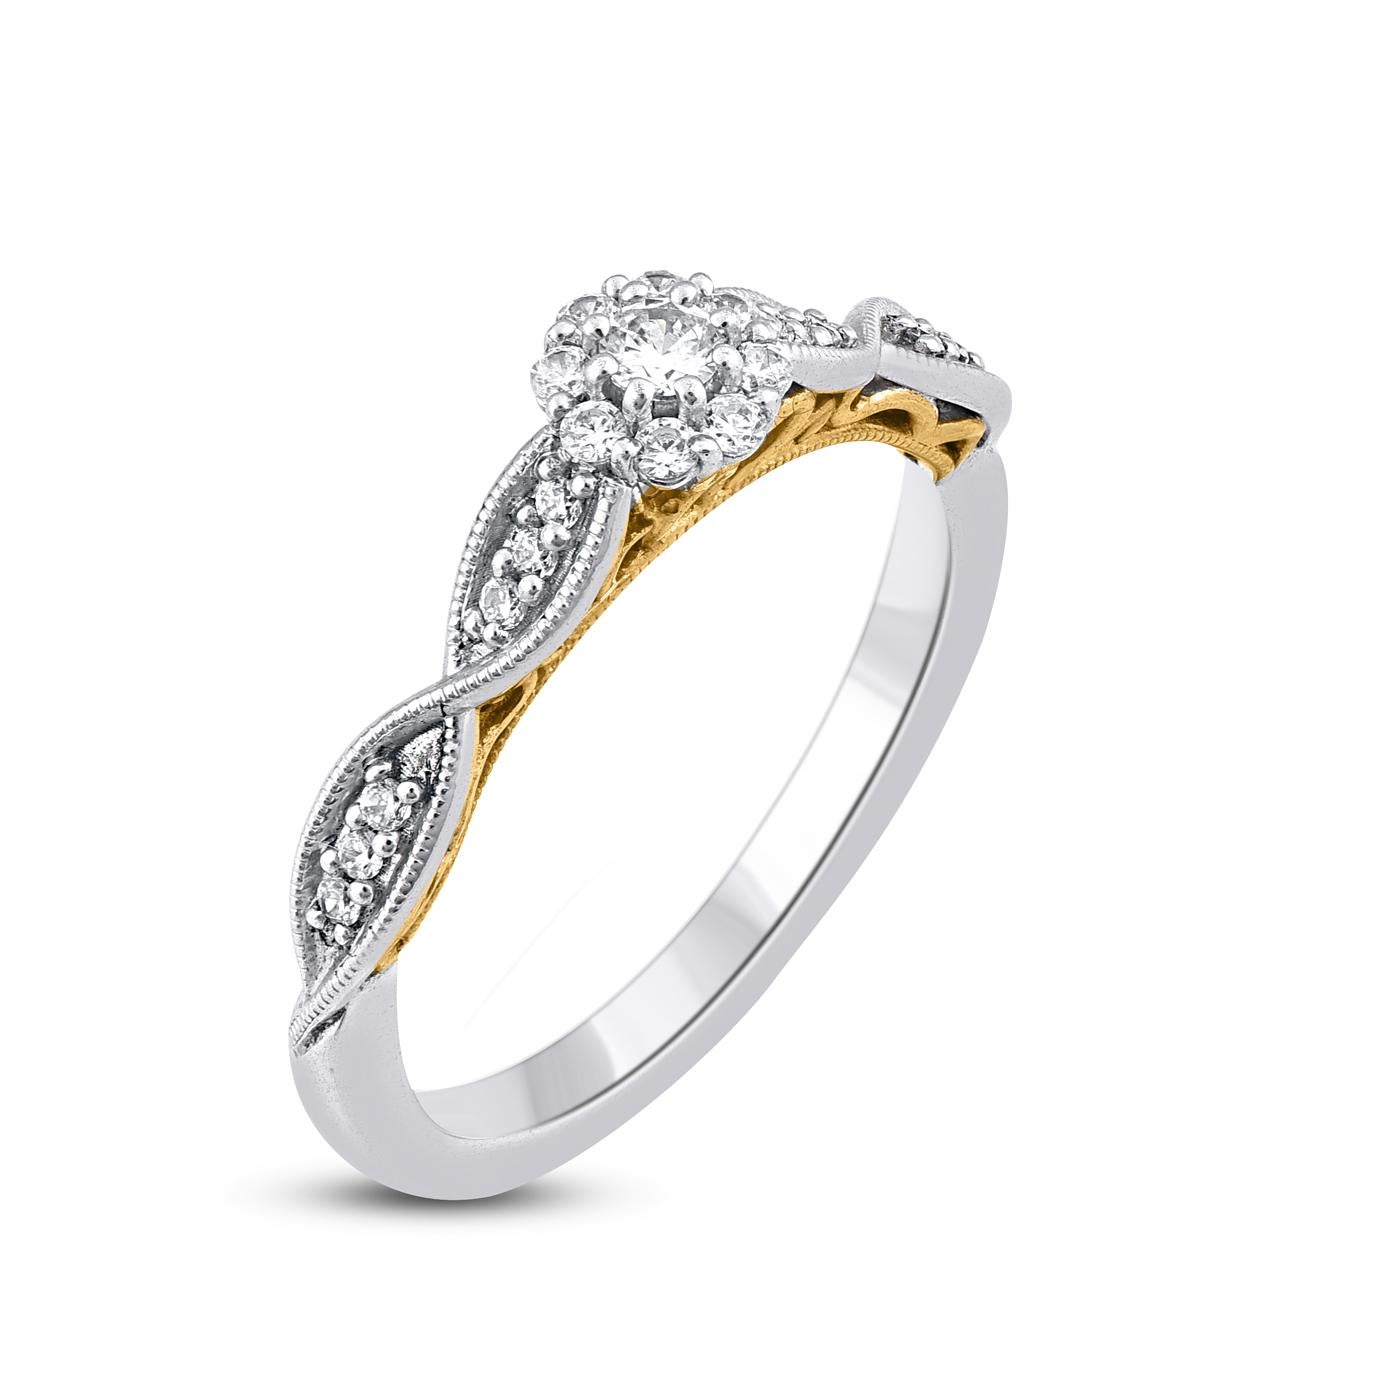 Contemporary TJD 0.25 Carat Brilliant Cut Diamond Halo Engagement Ring in 14KT Two Tone Gold For Sale